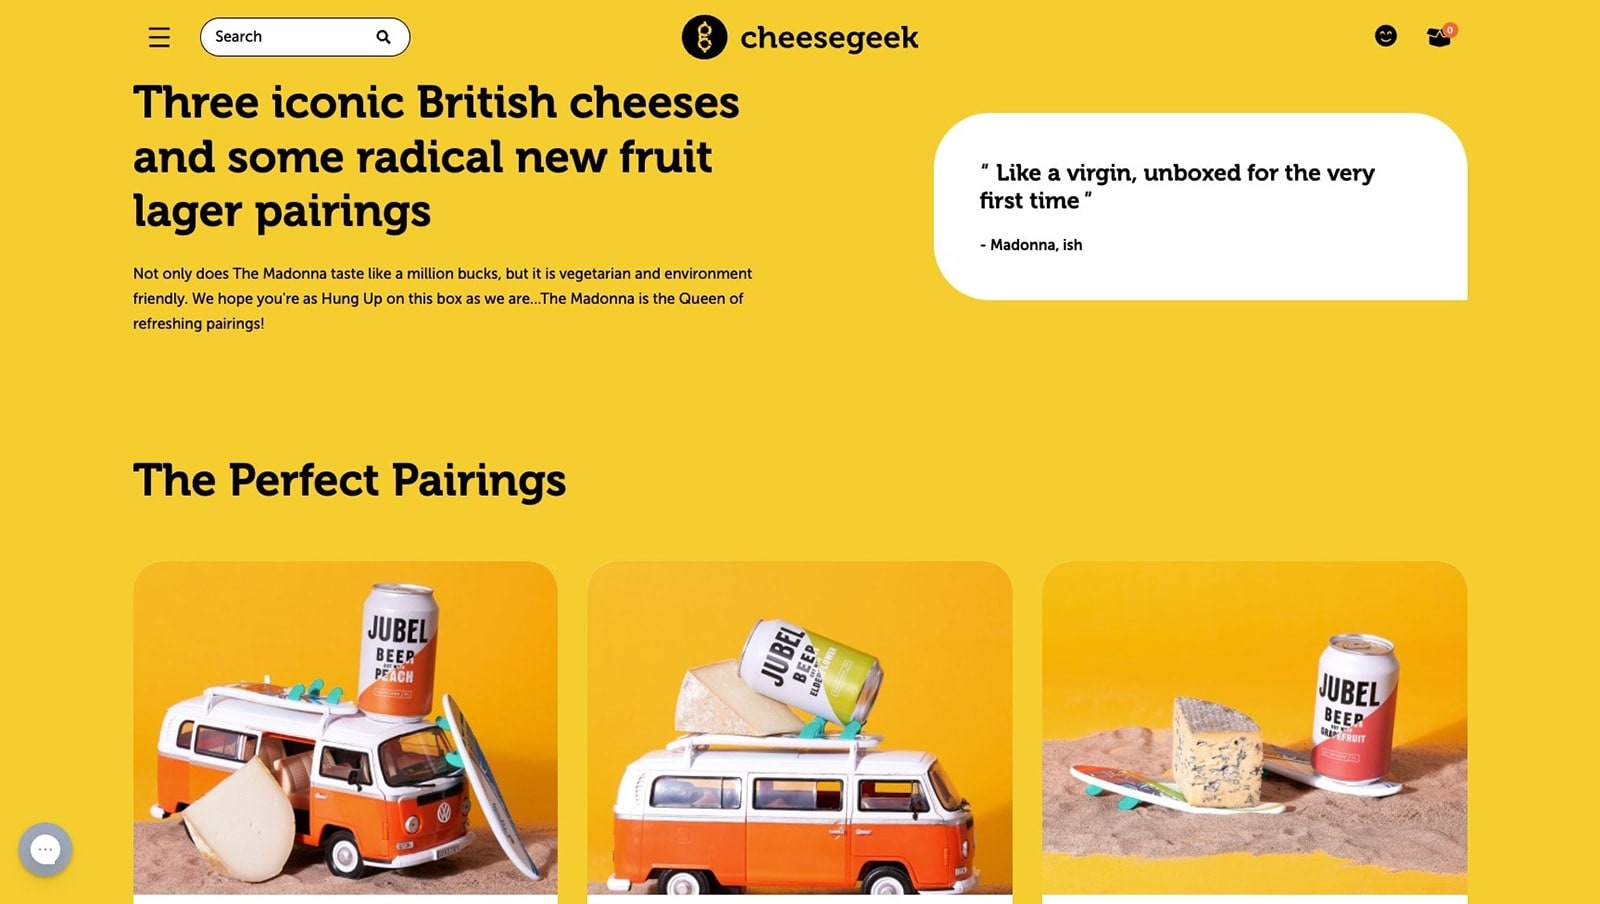 cheese geek product page using humor in photo